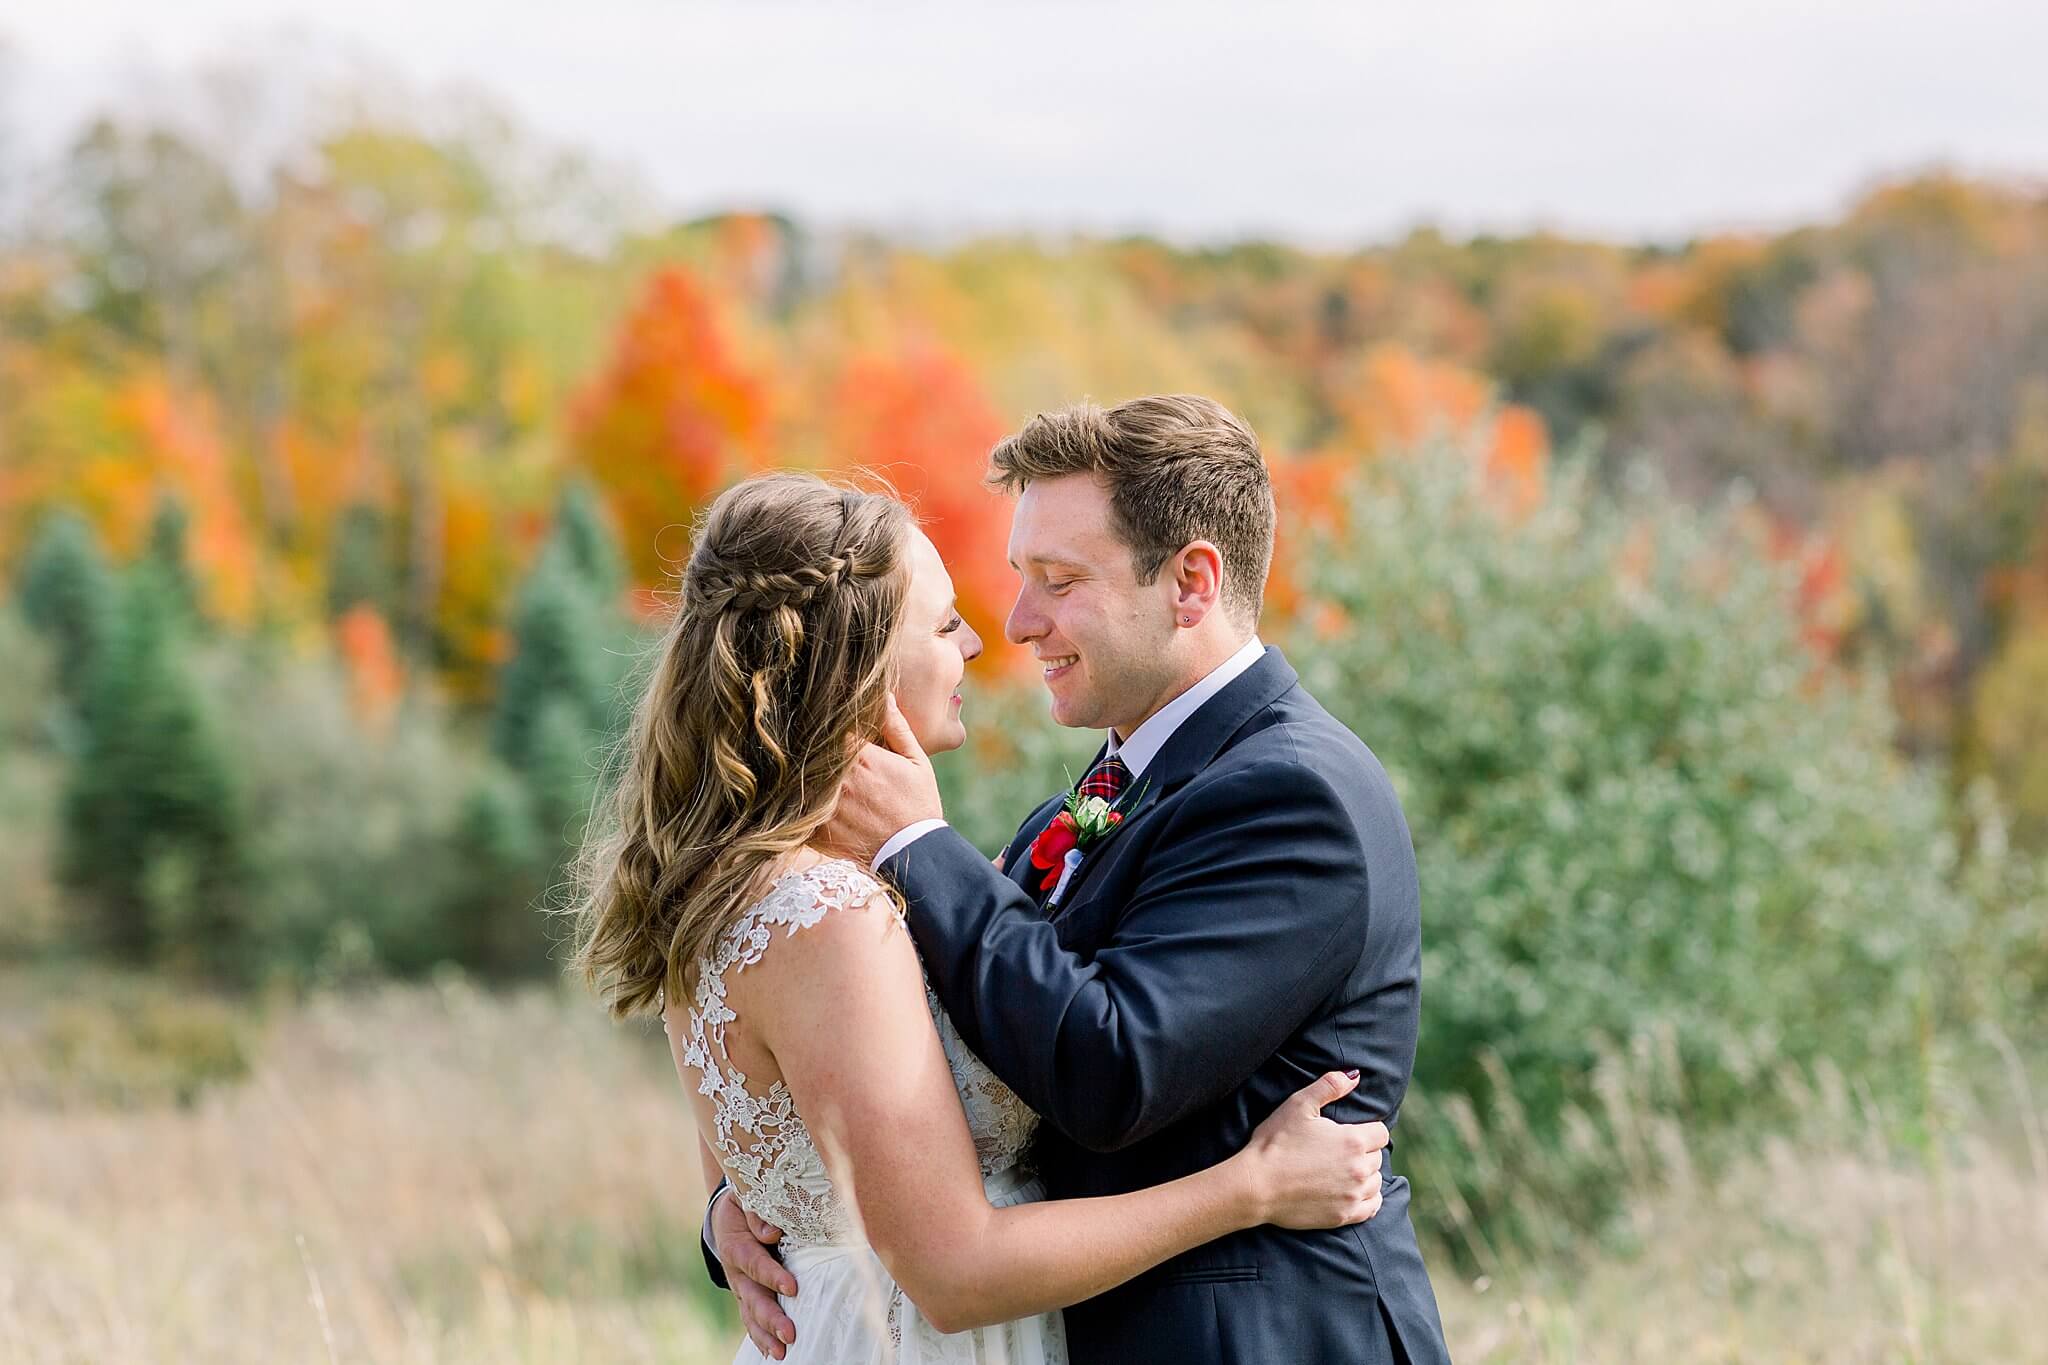 Bride and groom portraits during Timberlee Hills Wedding in Traverse City, Northern Michigan.